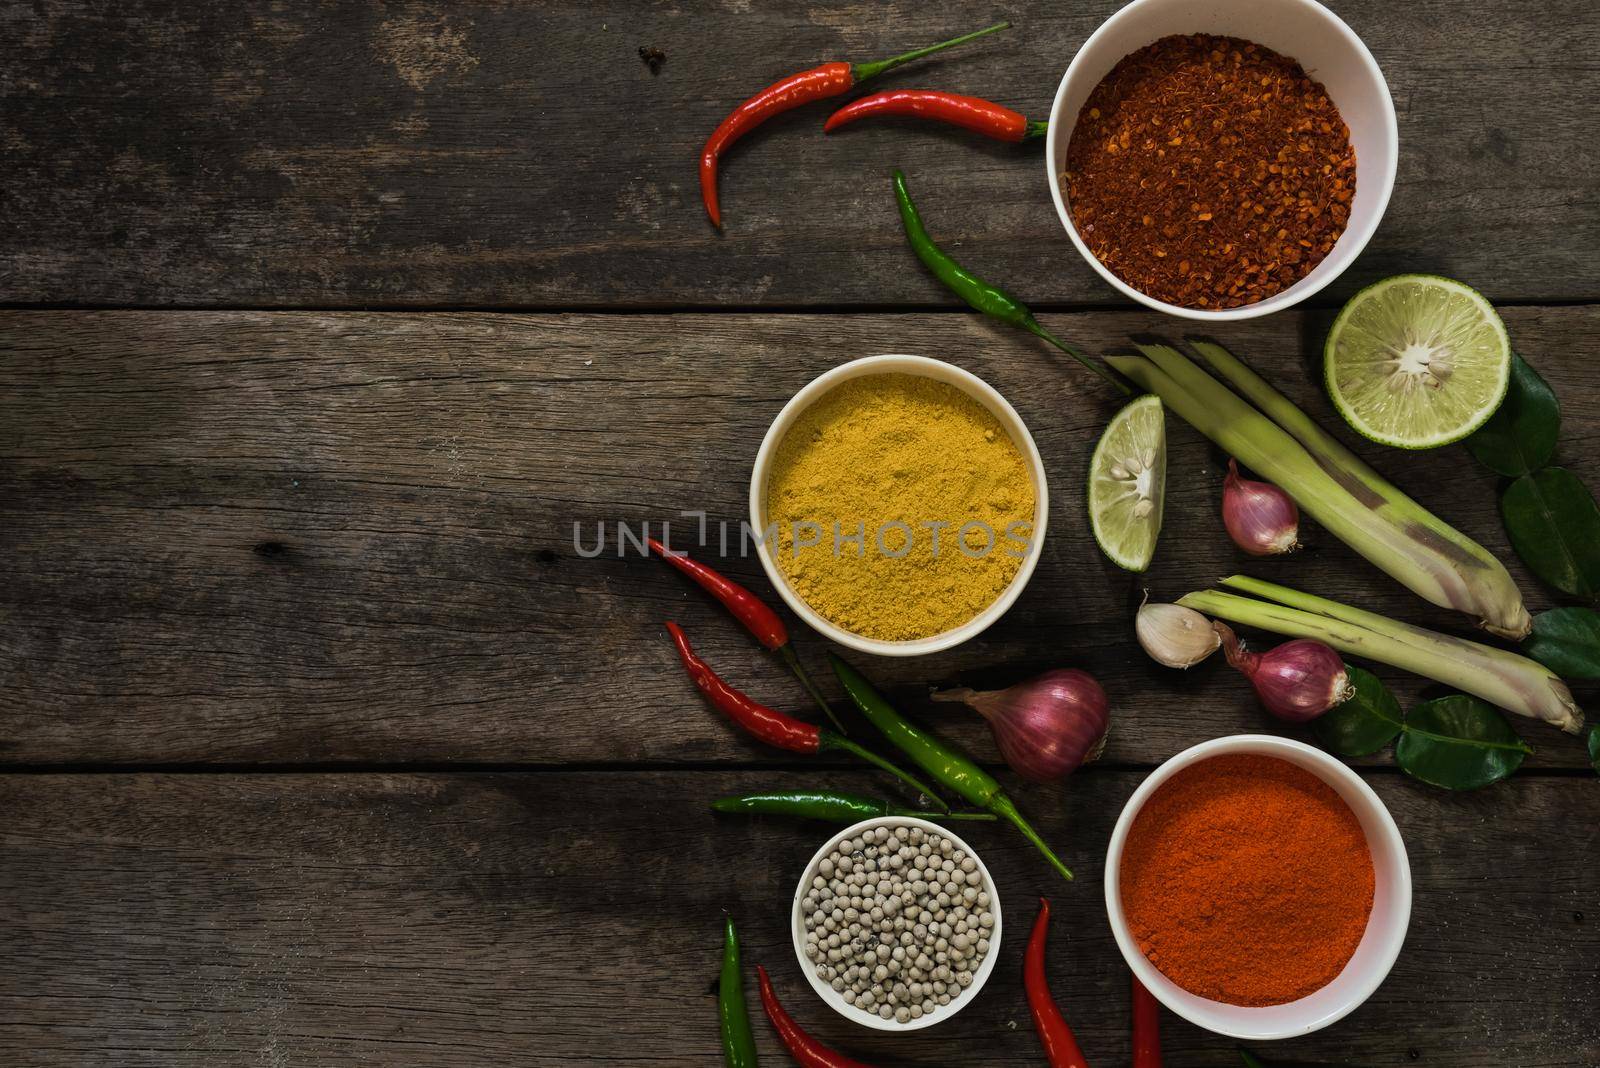 spices with ingredients on dark background. asian food, cooking concept